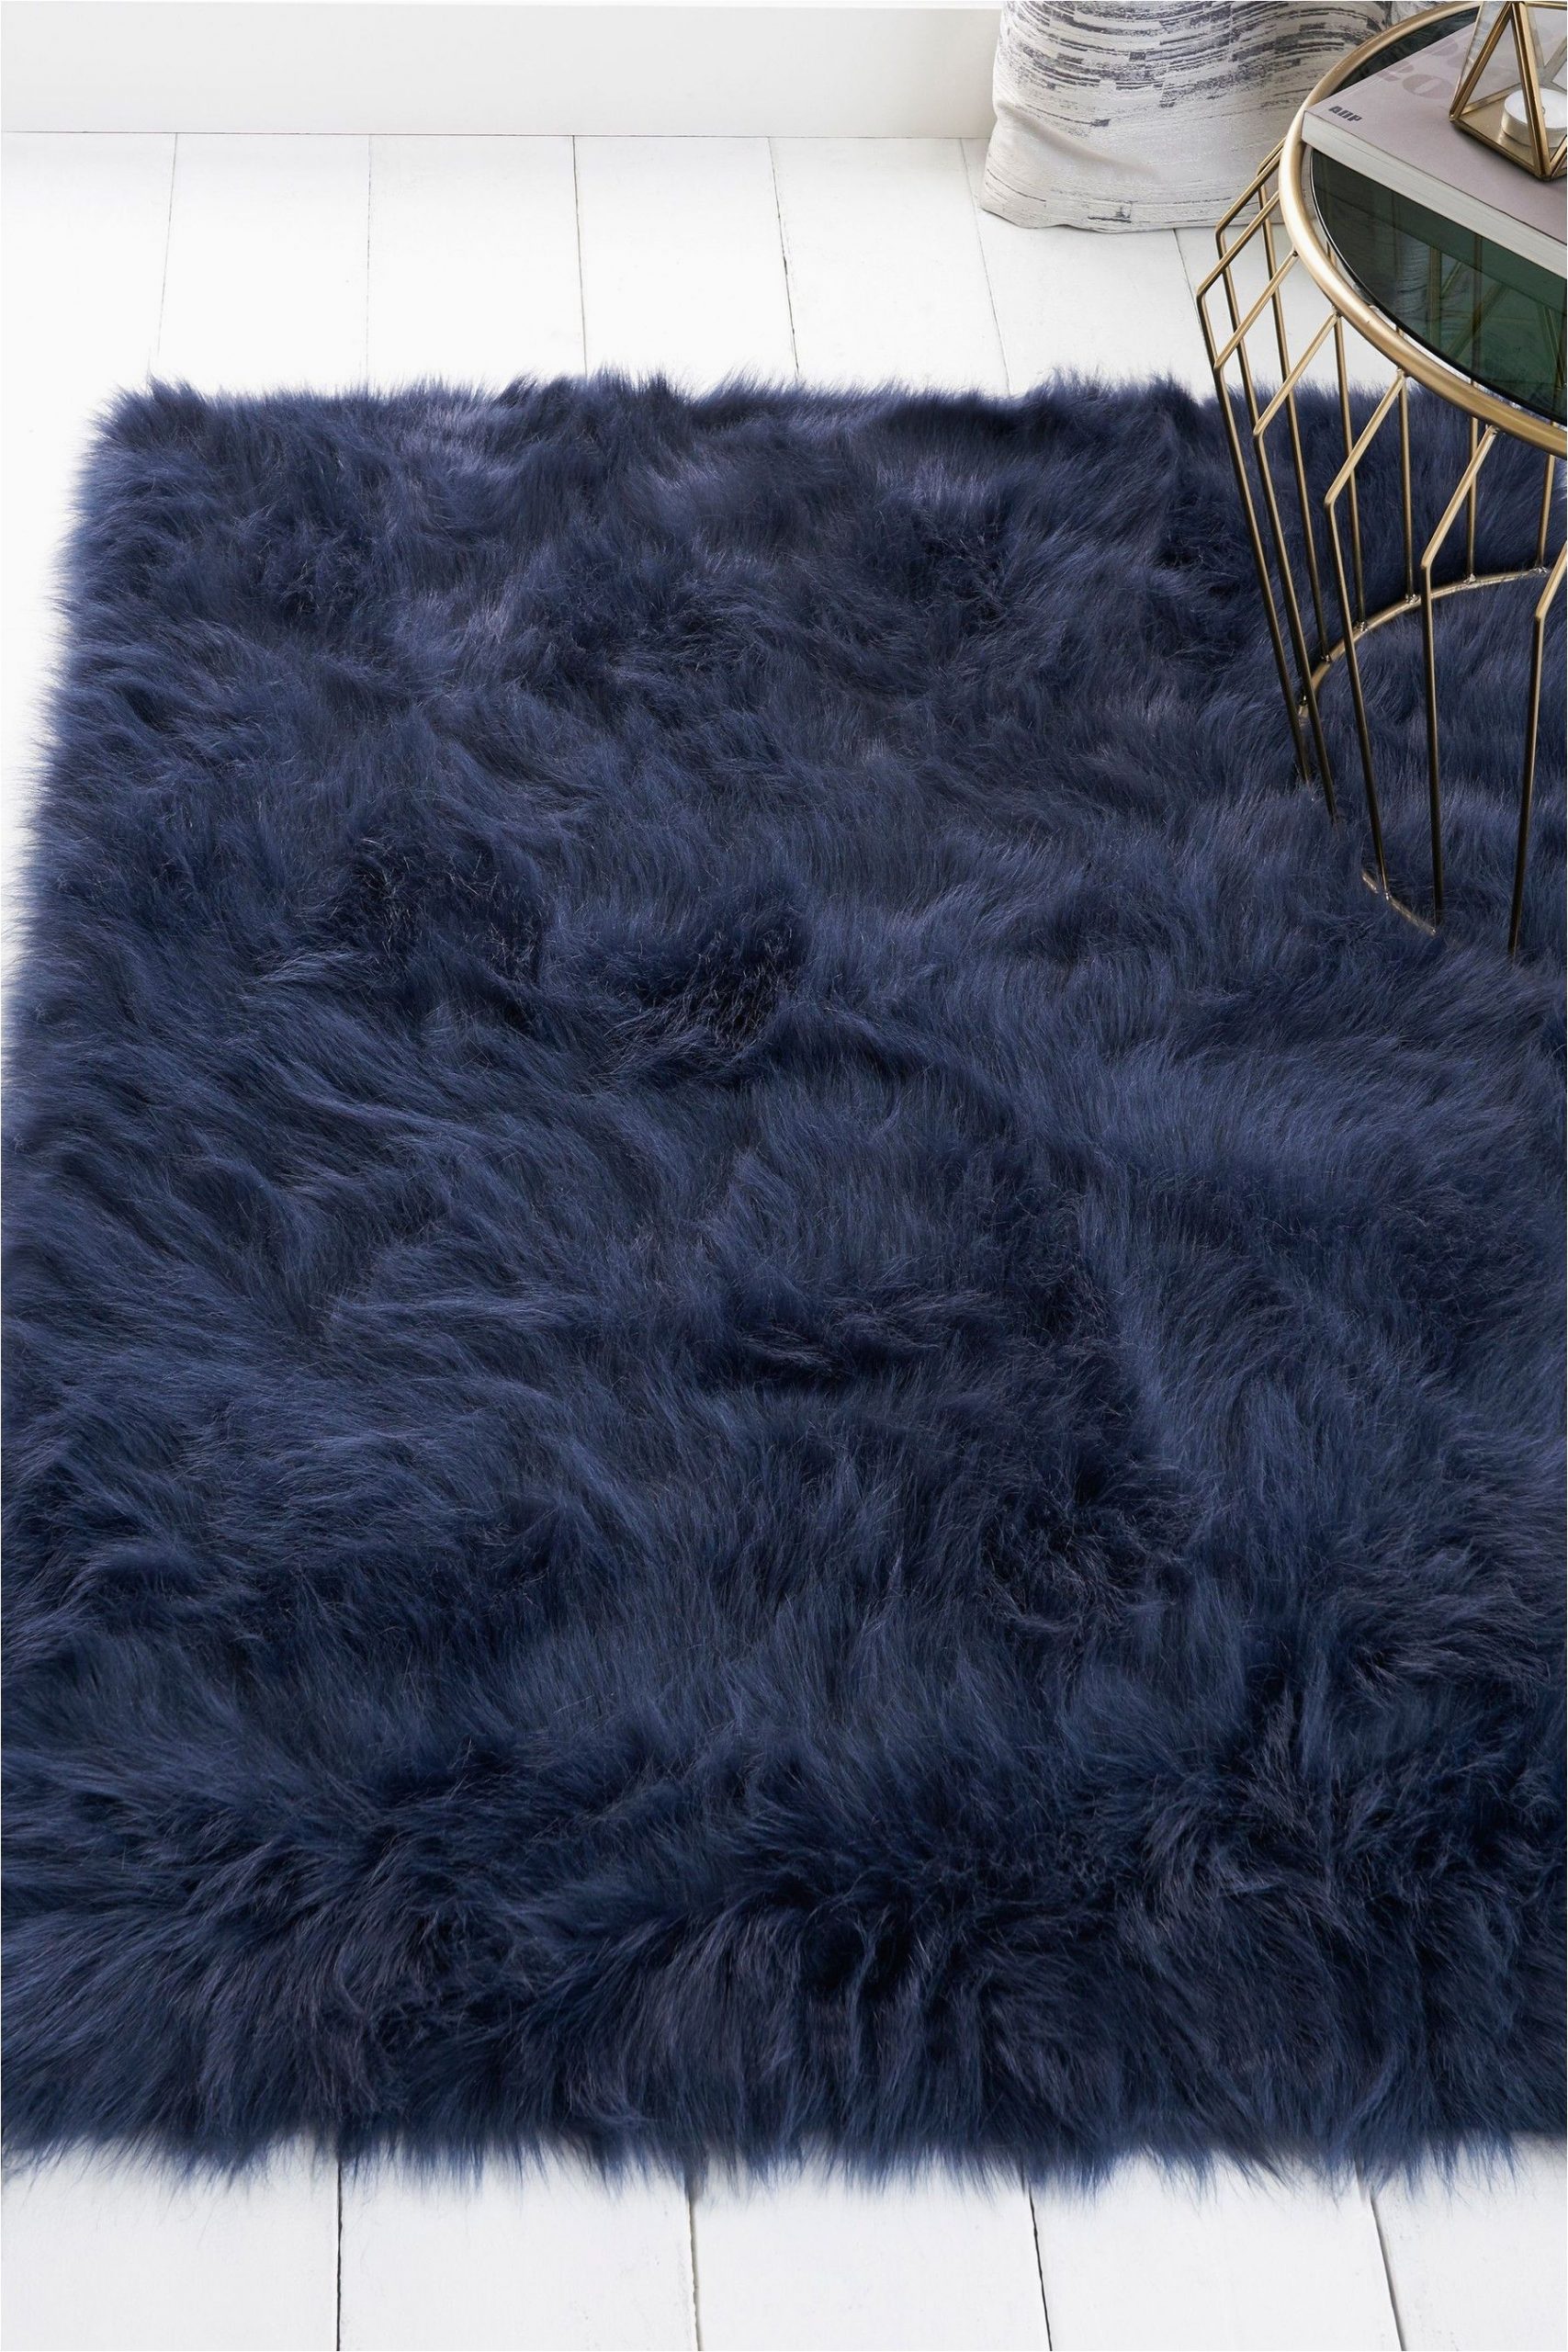 Dark Blue Fluffy Rug Pin by Olganna Gifts and Accessorie On Bedroom Colour